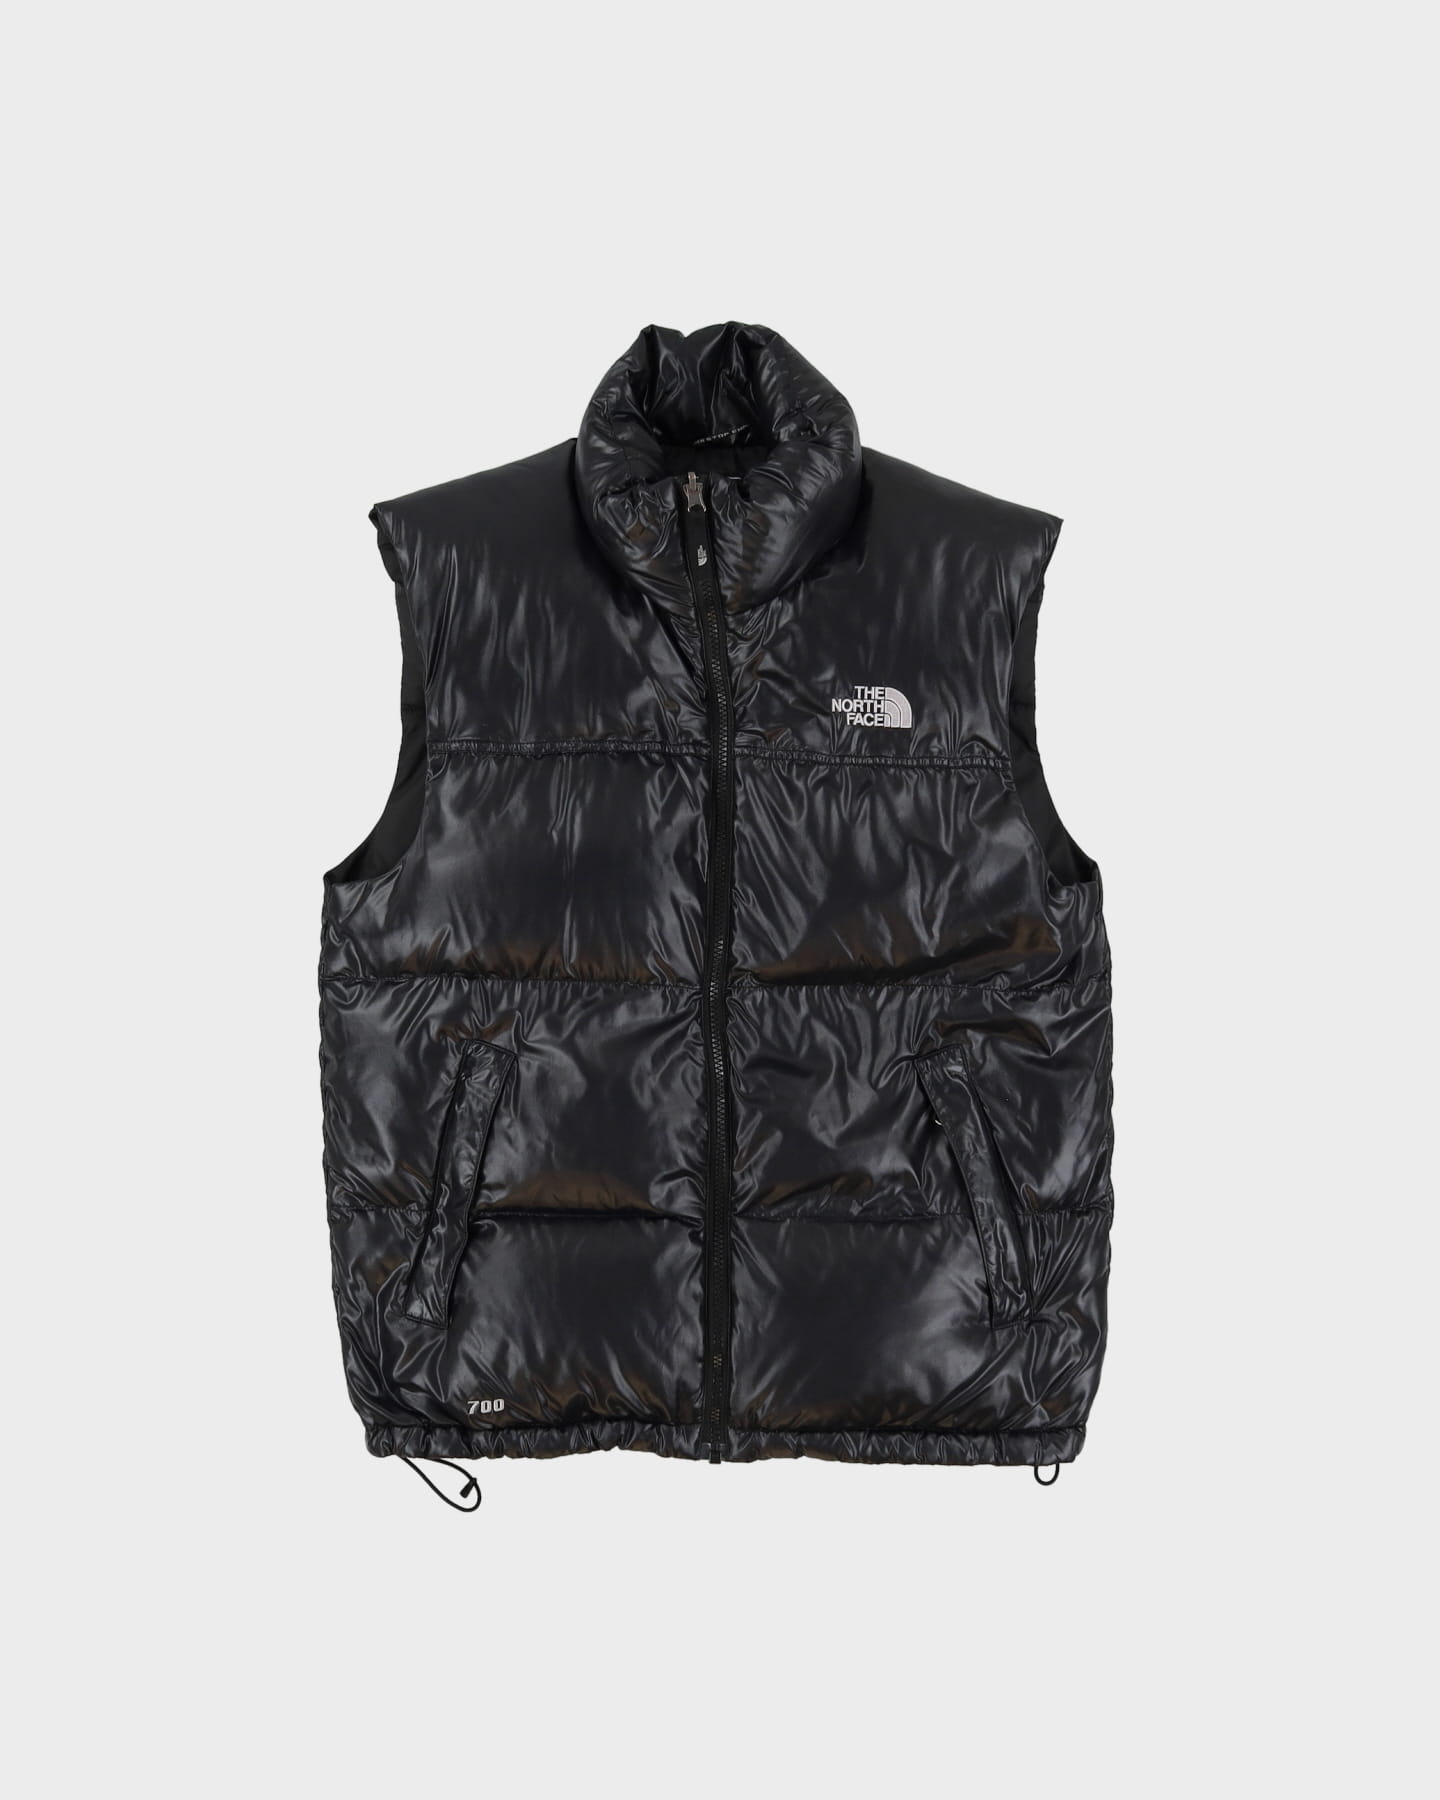 The North Face Black Sleeveless Gilet Puffer Jacket - S